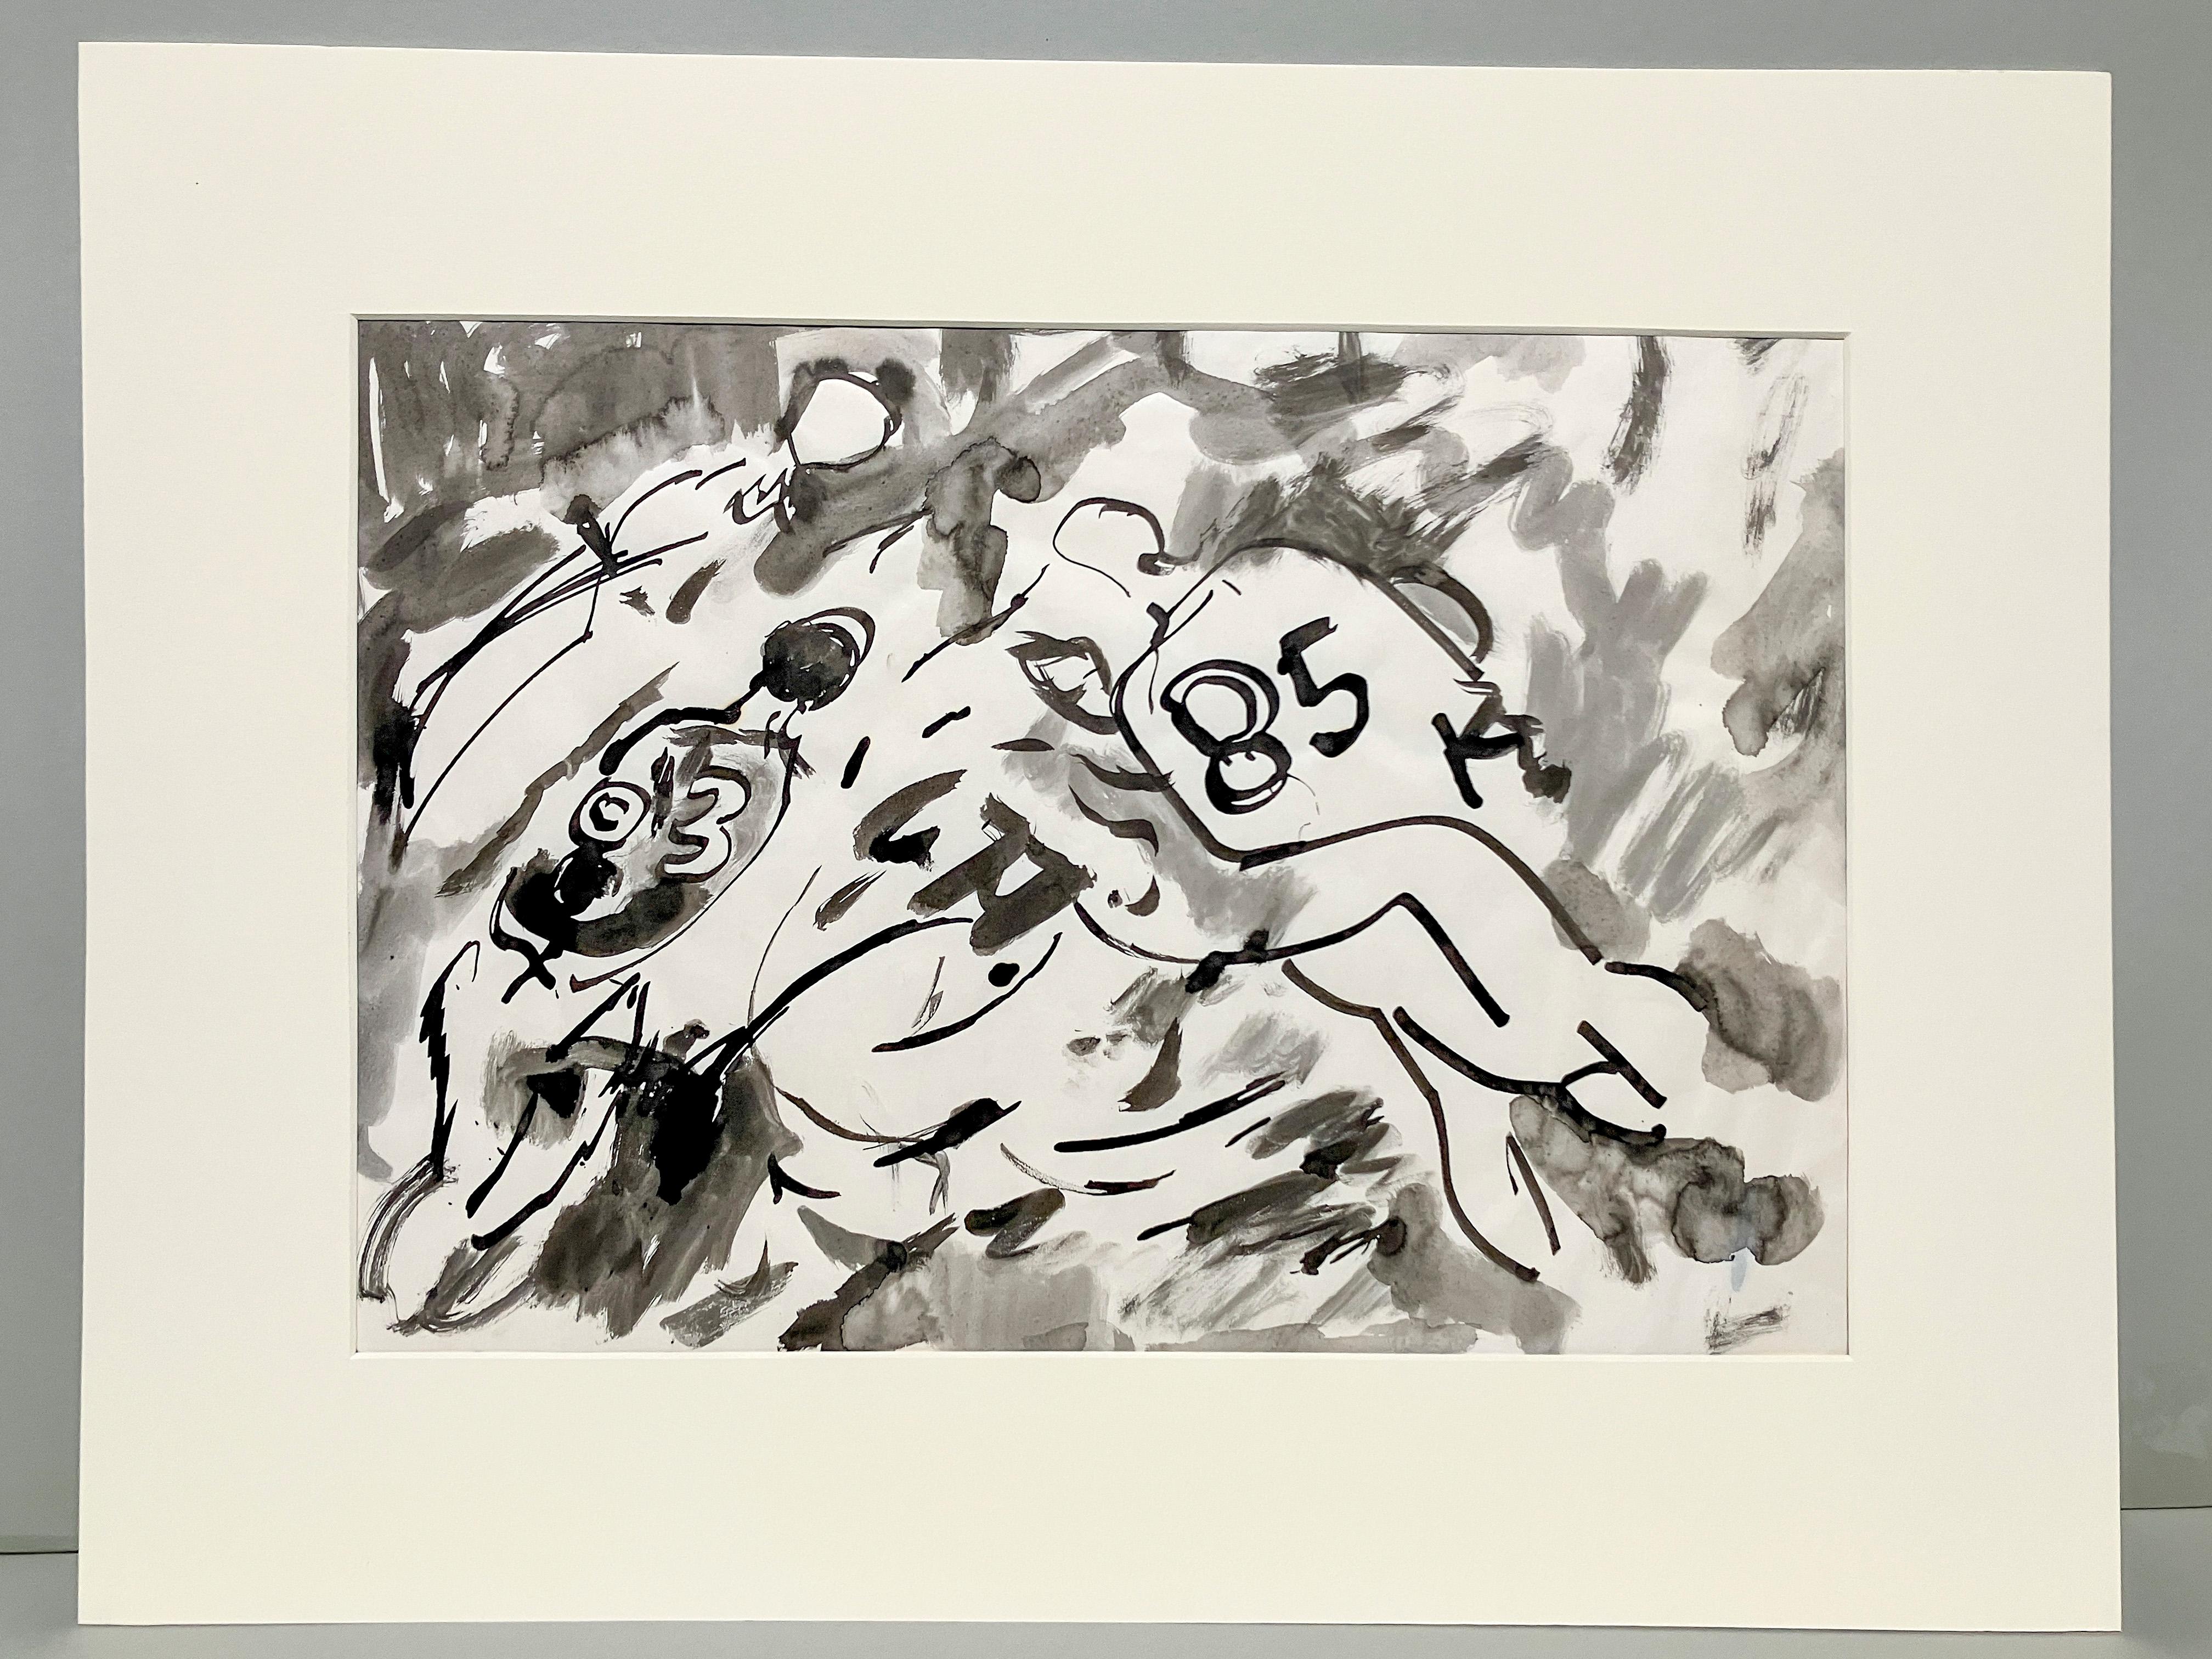 Watercolor on Paper Study of a Notre Dame Football Game by Artist Francis Chapin For Sale 3